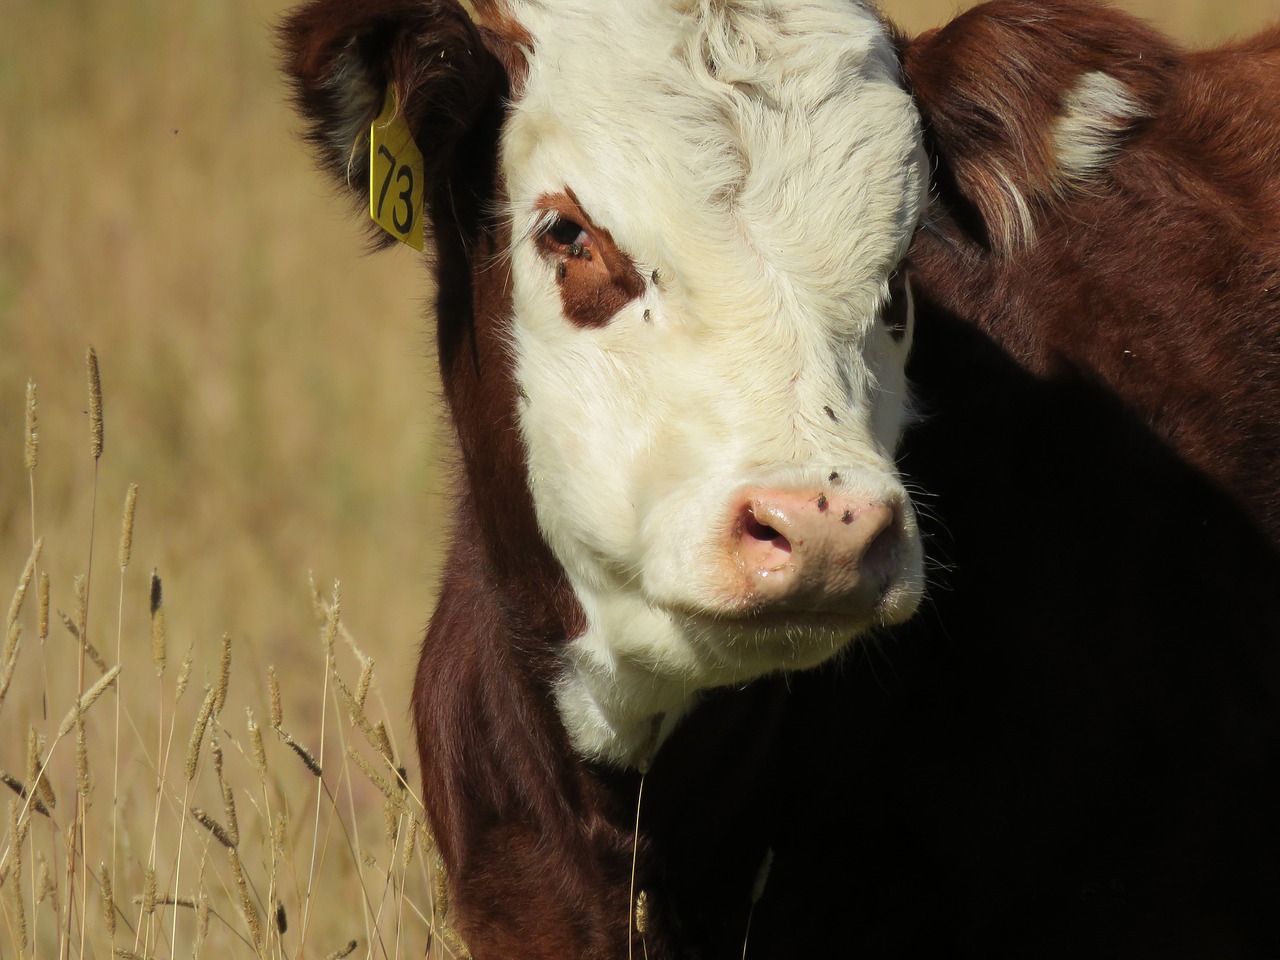 A hereford calf in a field with flies on its face.